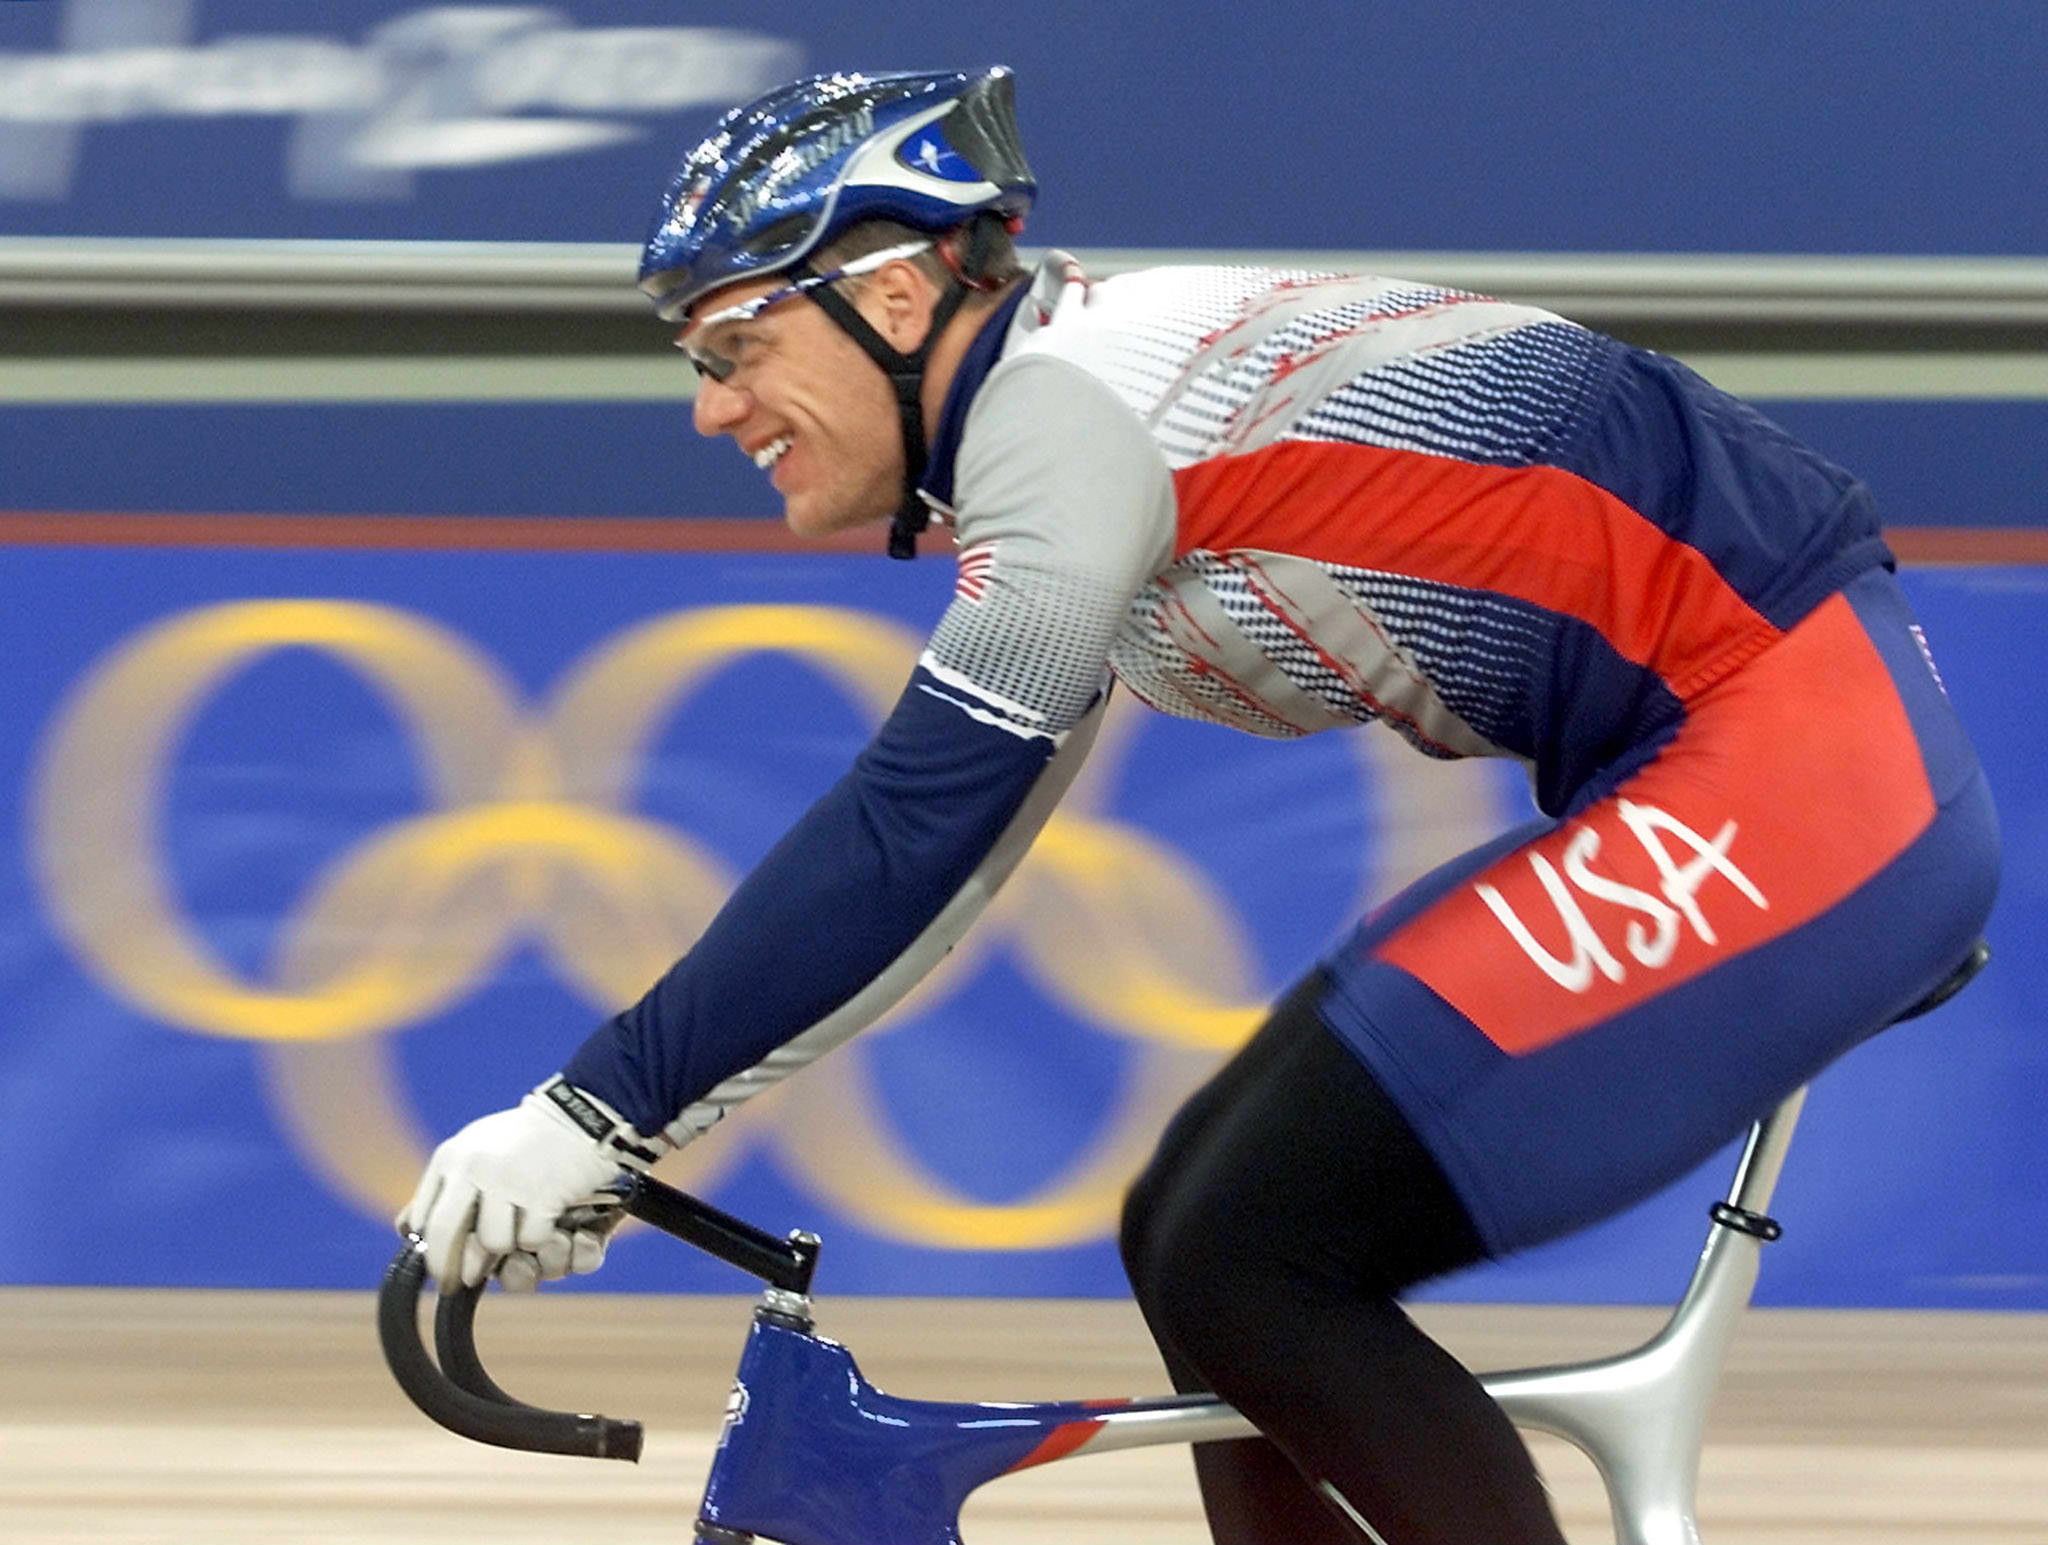 Marty Nothstein: How To Prepare Your Body For Track Cycling